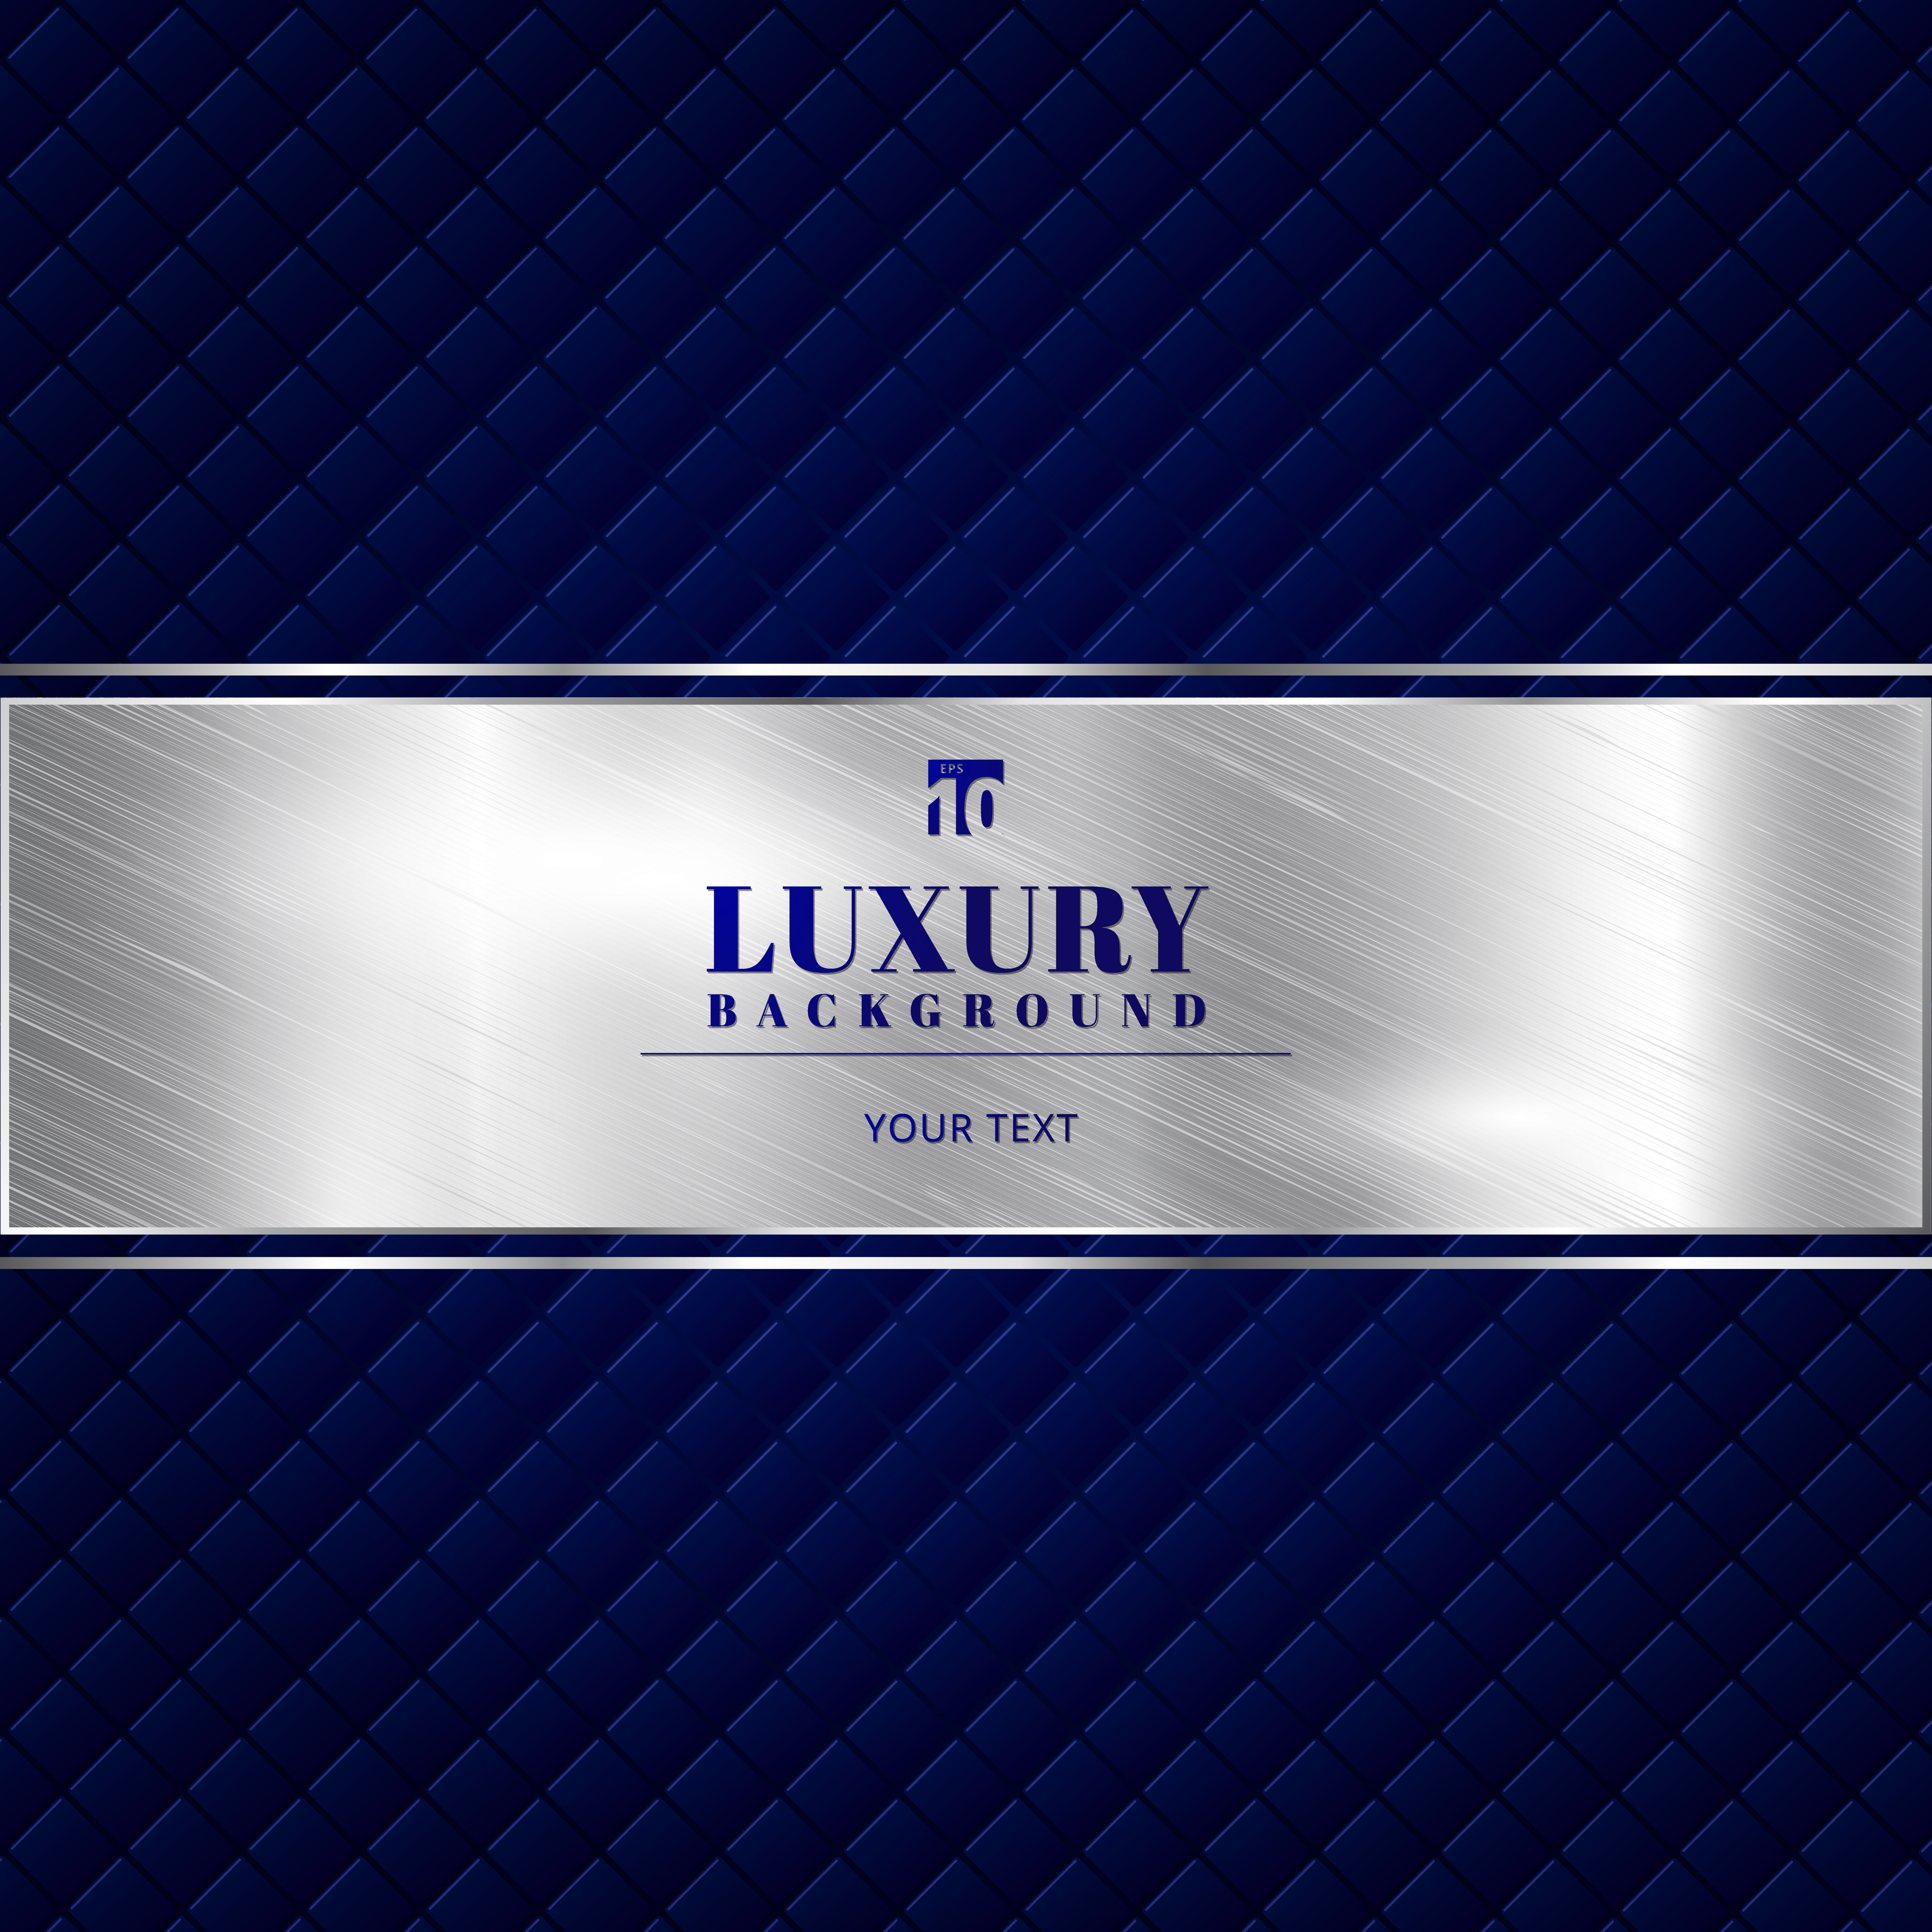 Luxury invitation blue background with a pattern of squares texture and